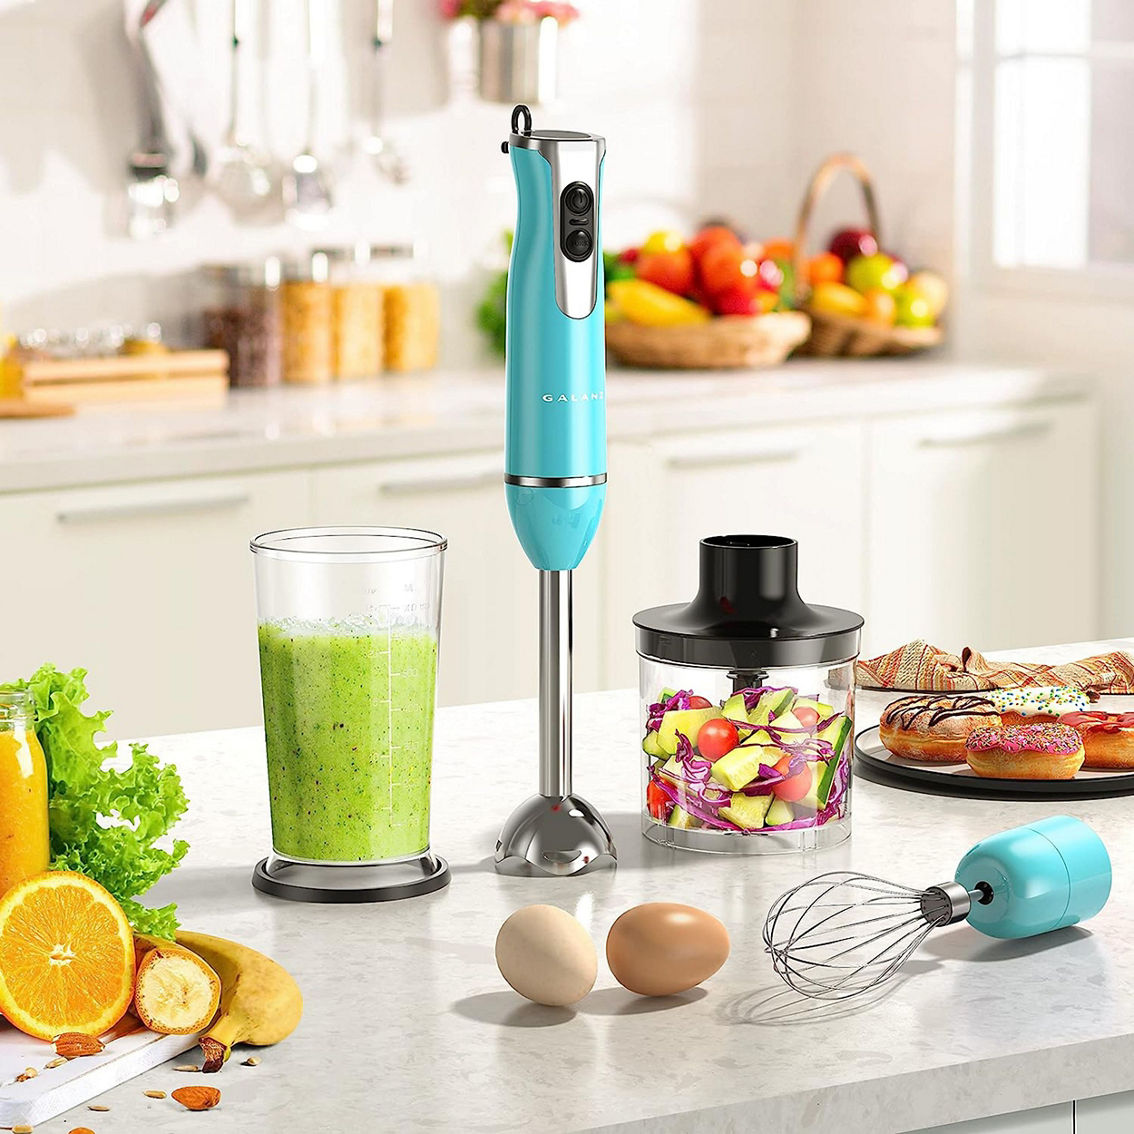 Galanz 2 Speed Multi-Function Retro Immersion Hand Blender in Bebop Blue - Image 5 of 5